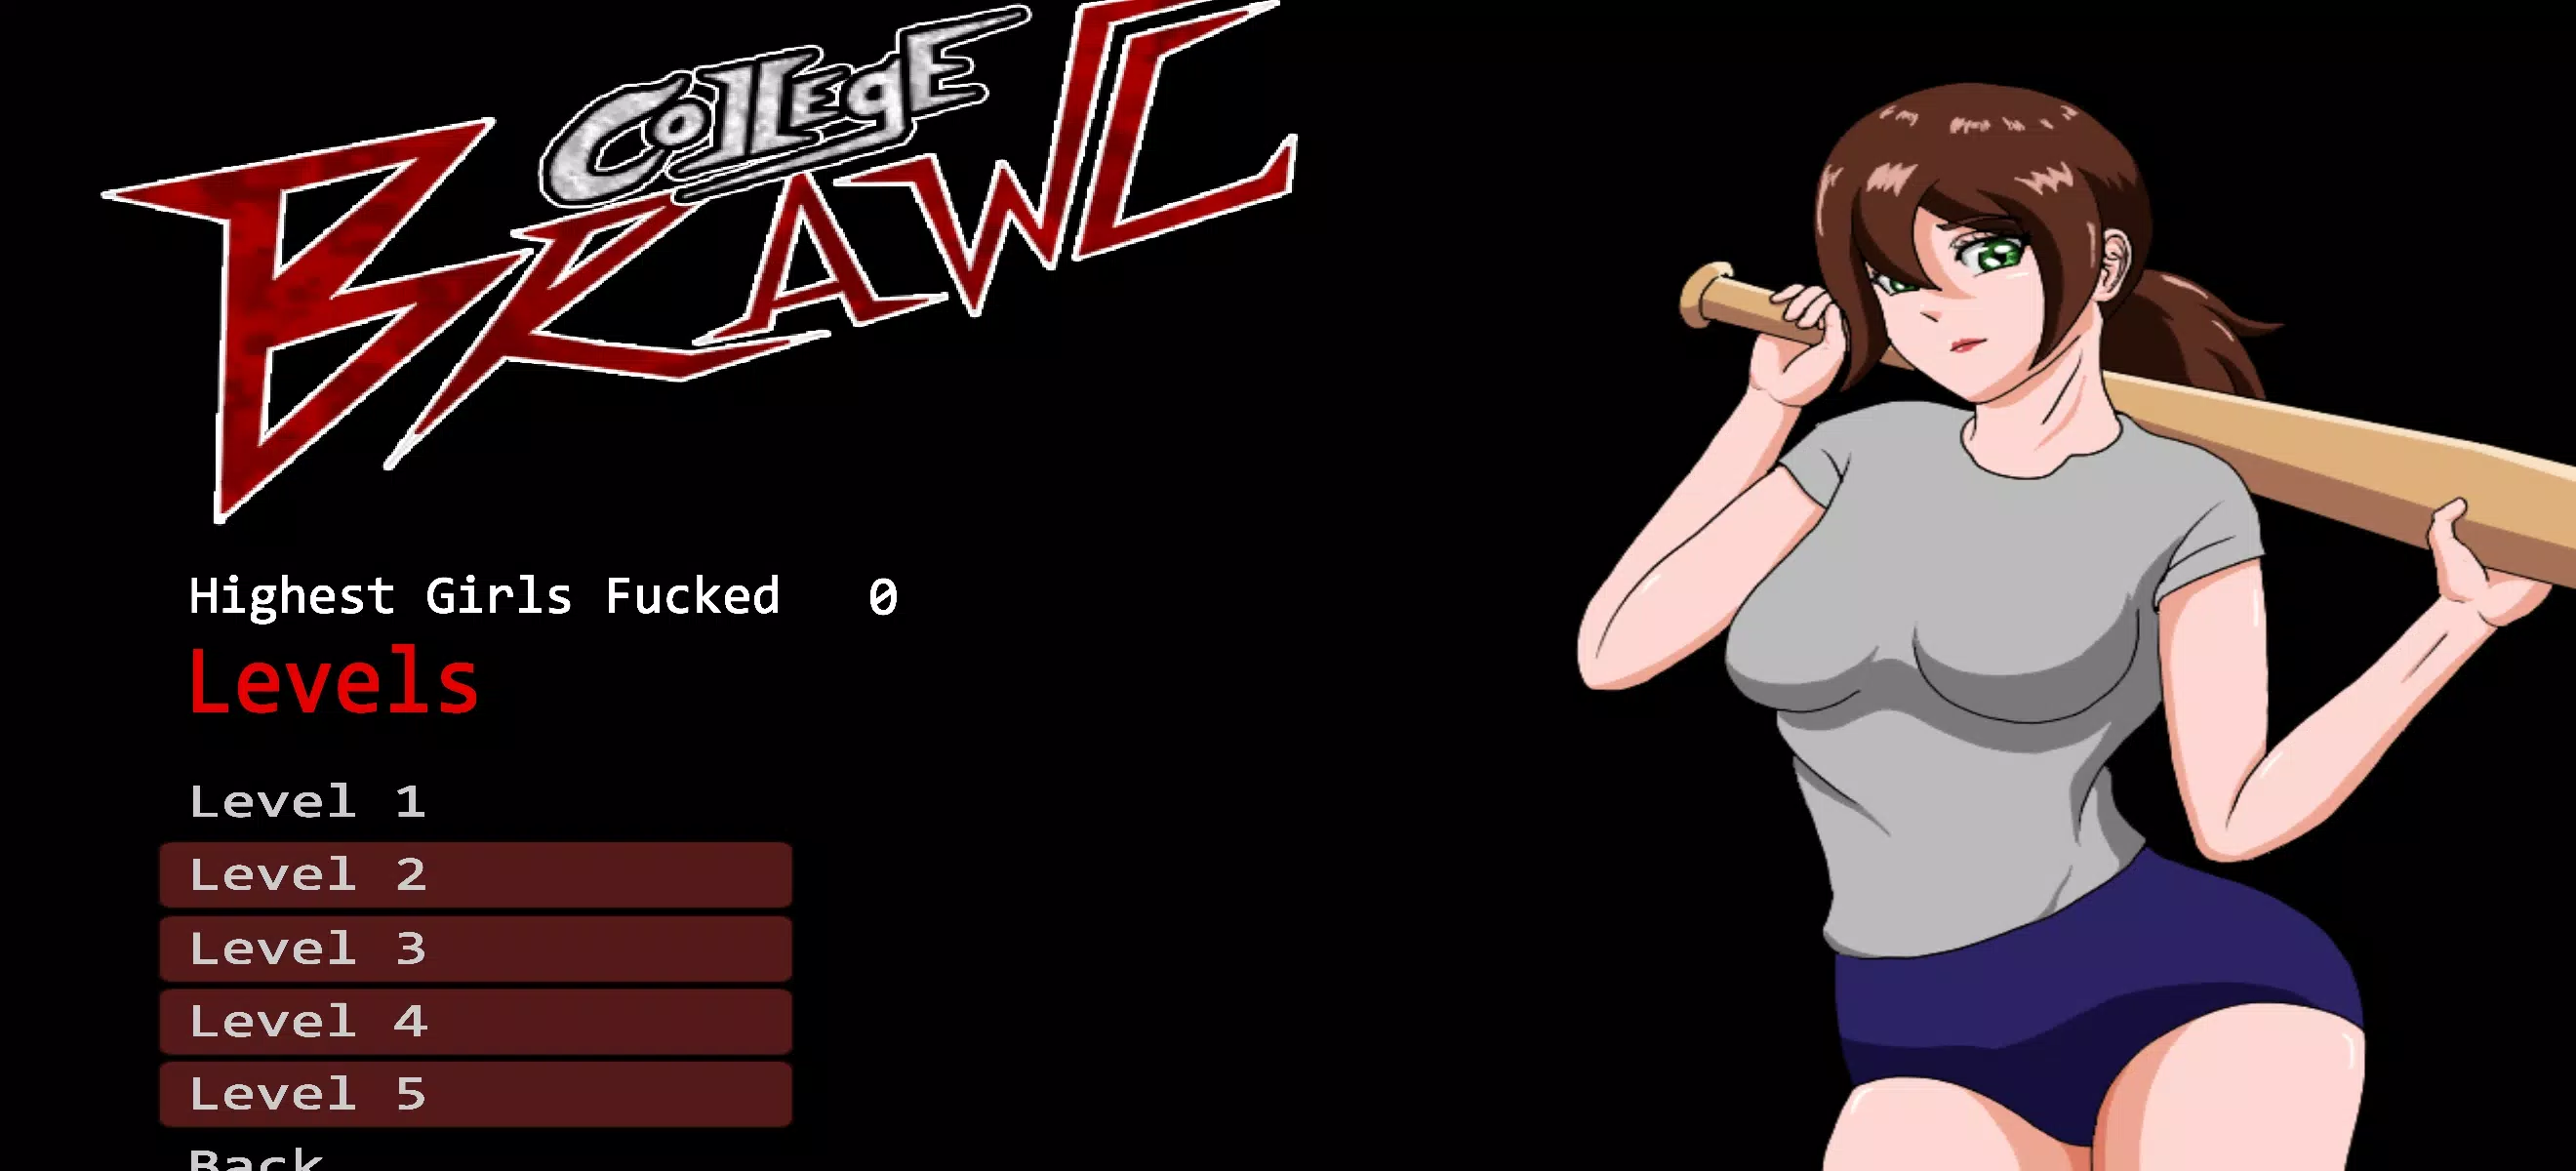 College Brawl APK v1.4.2 Download Latest Version For Android - TechLoky